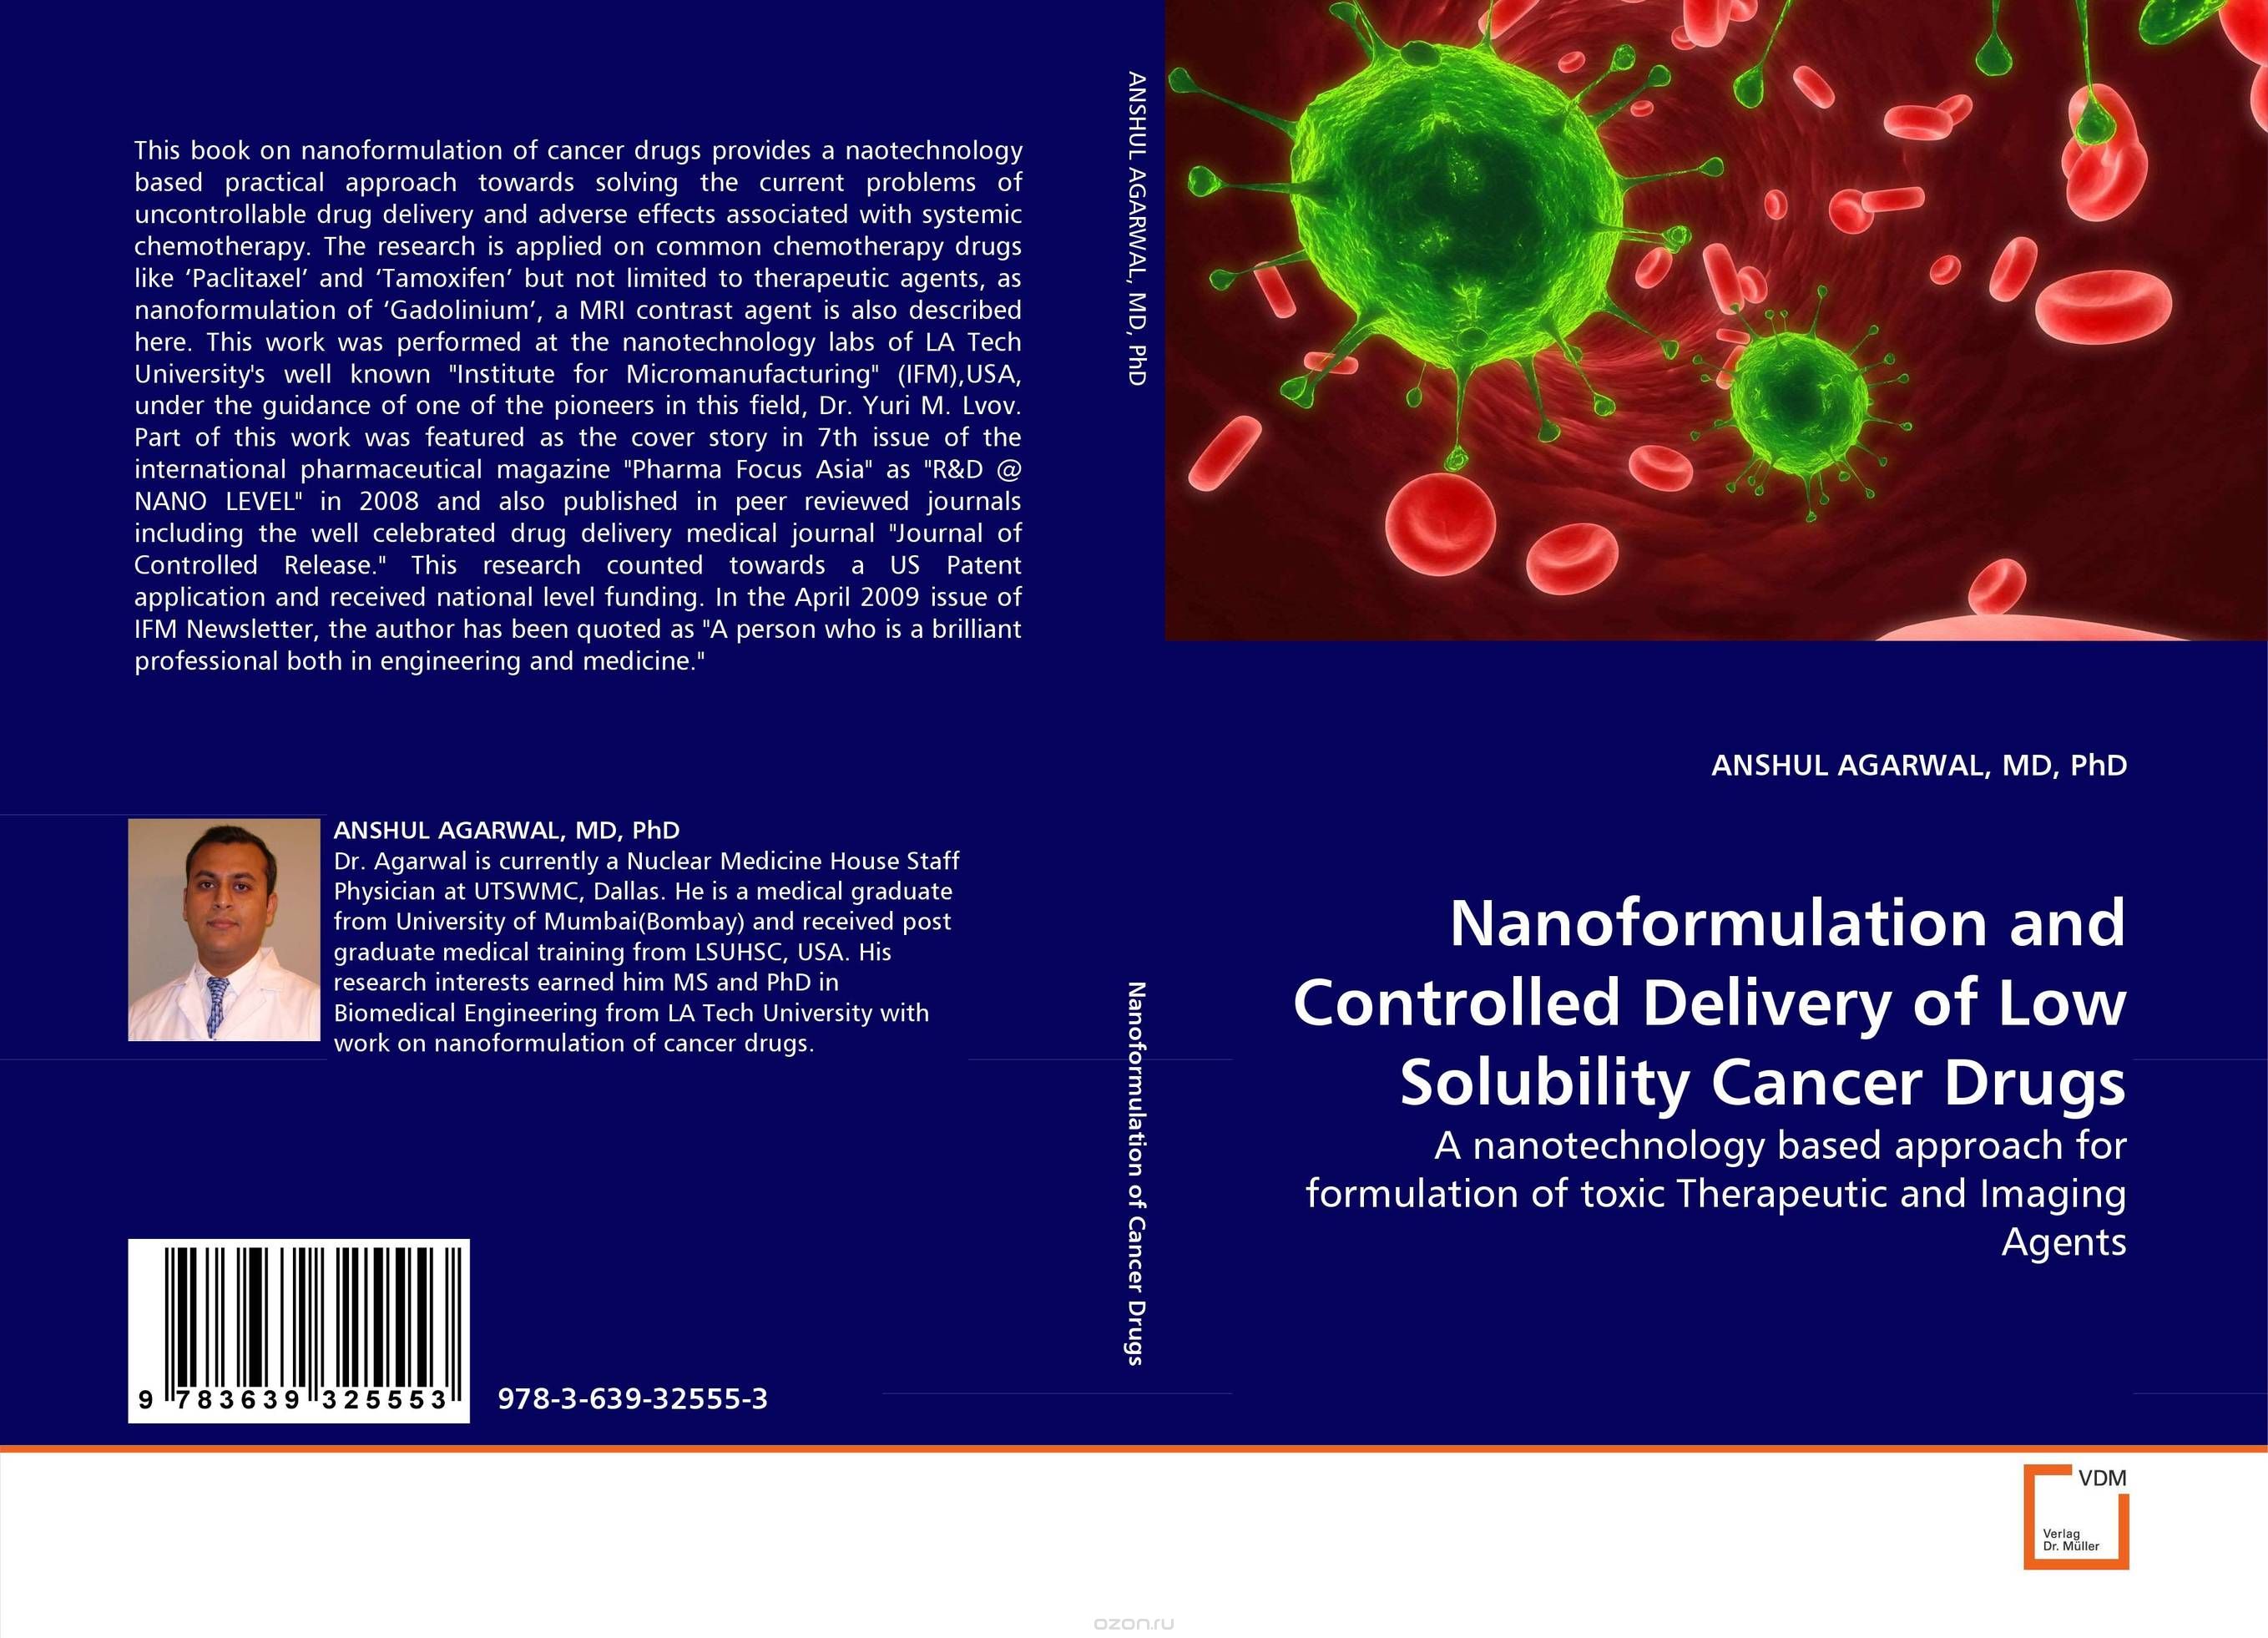 Скачать книгу "Nanoformulation and Controlled Delivery of Low Solubility Cancer Drugs"